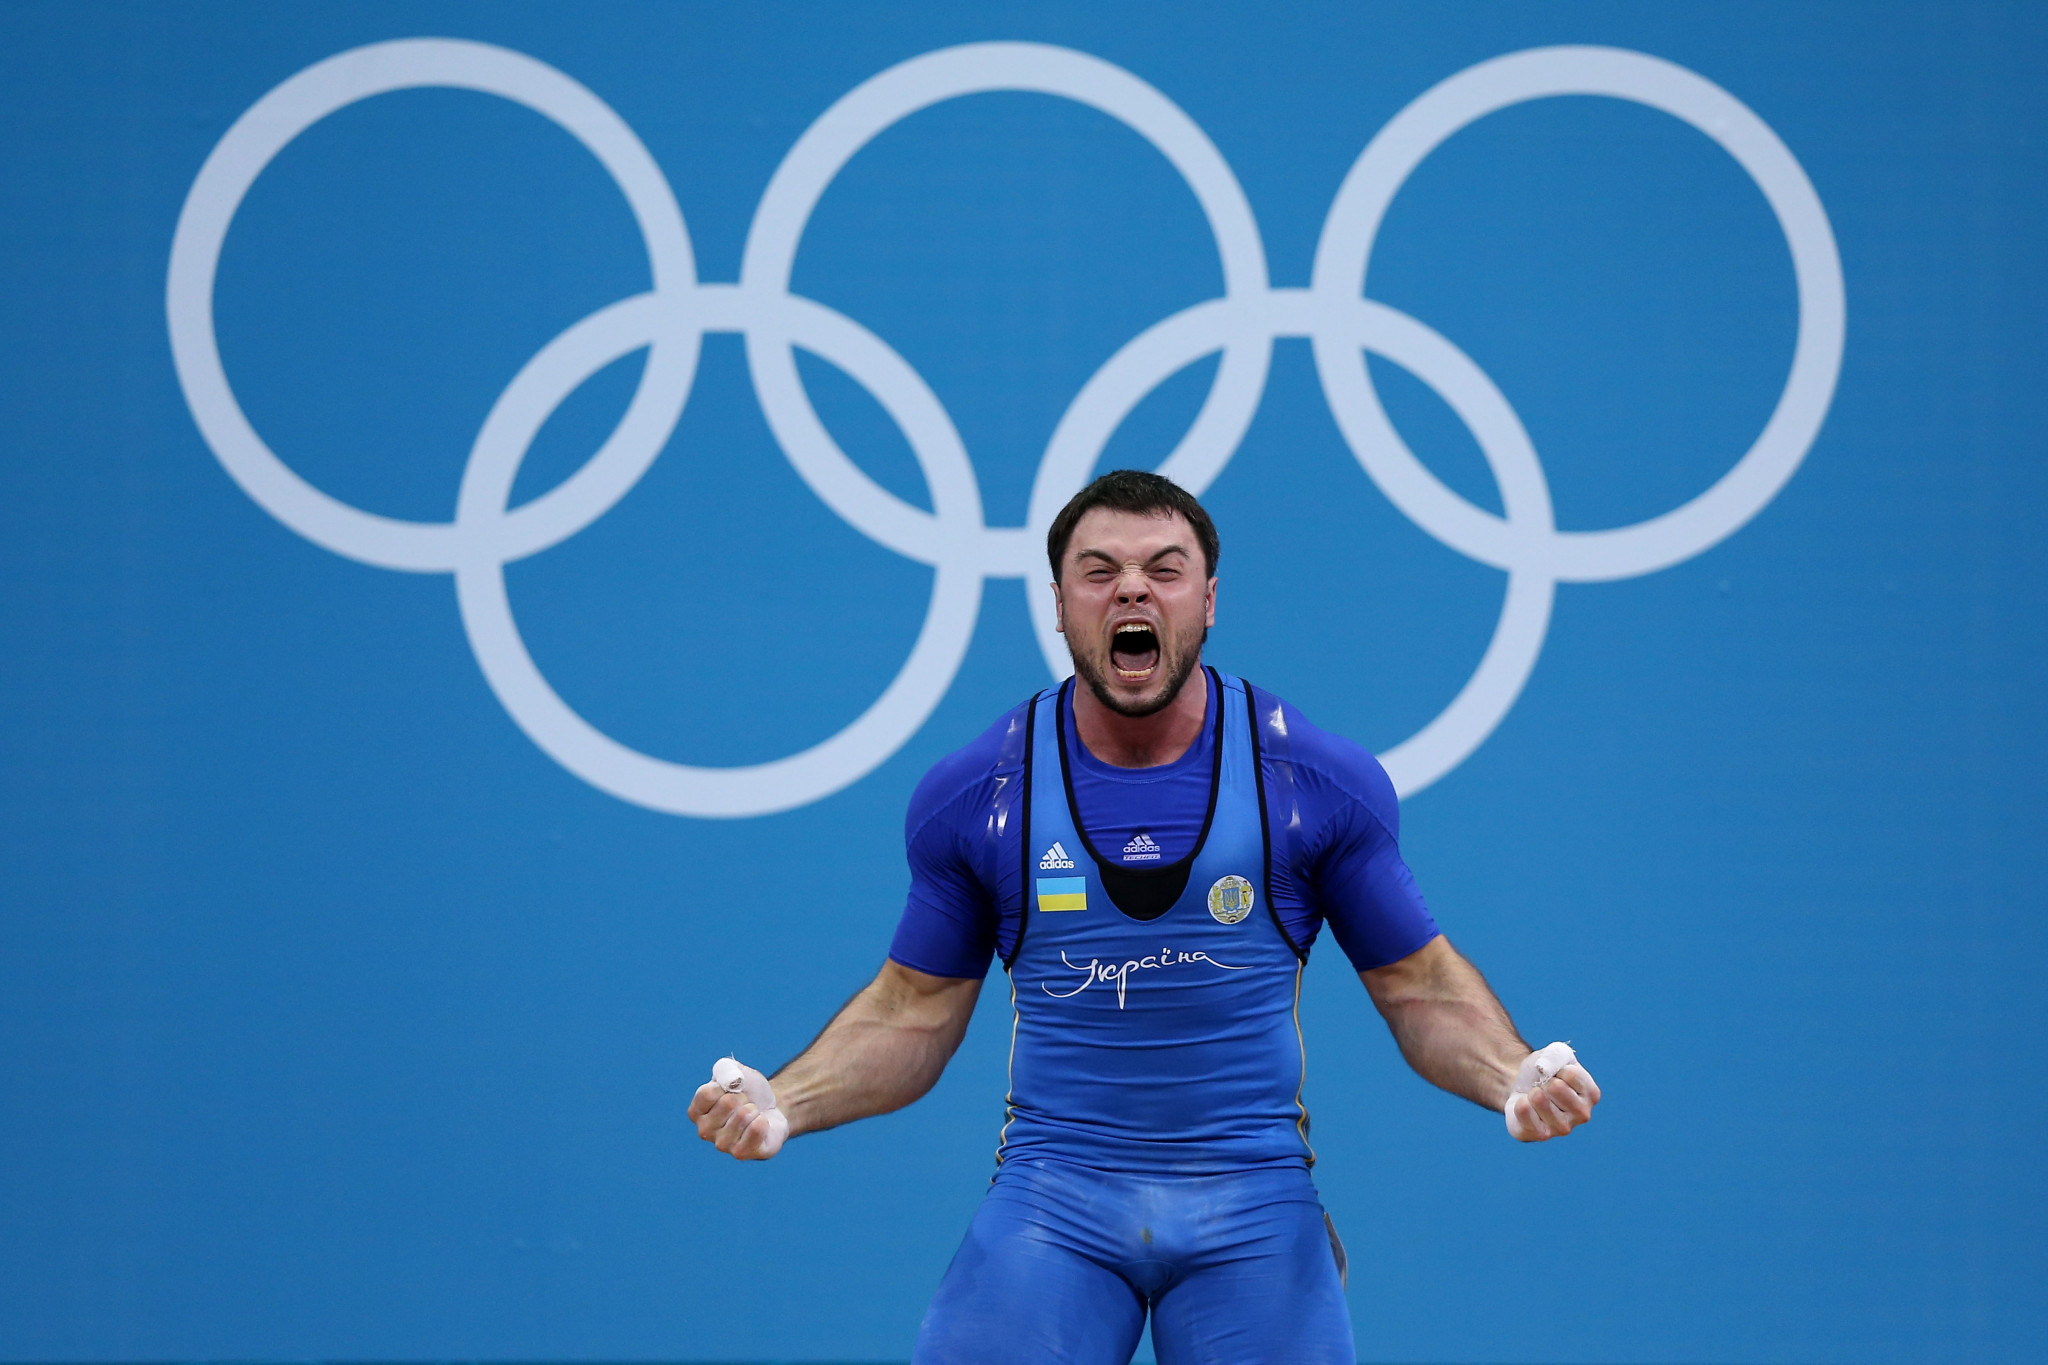 IOC confirm Torokhtiy stripped over London 2012 gold over doping offence